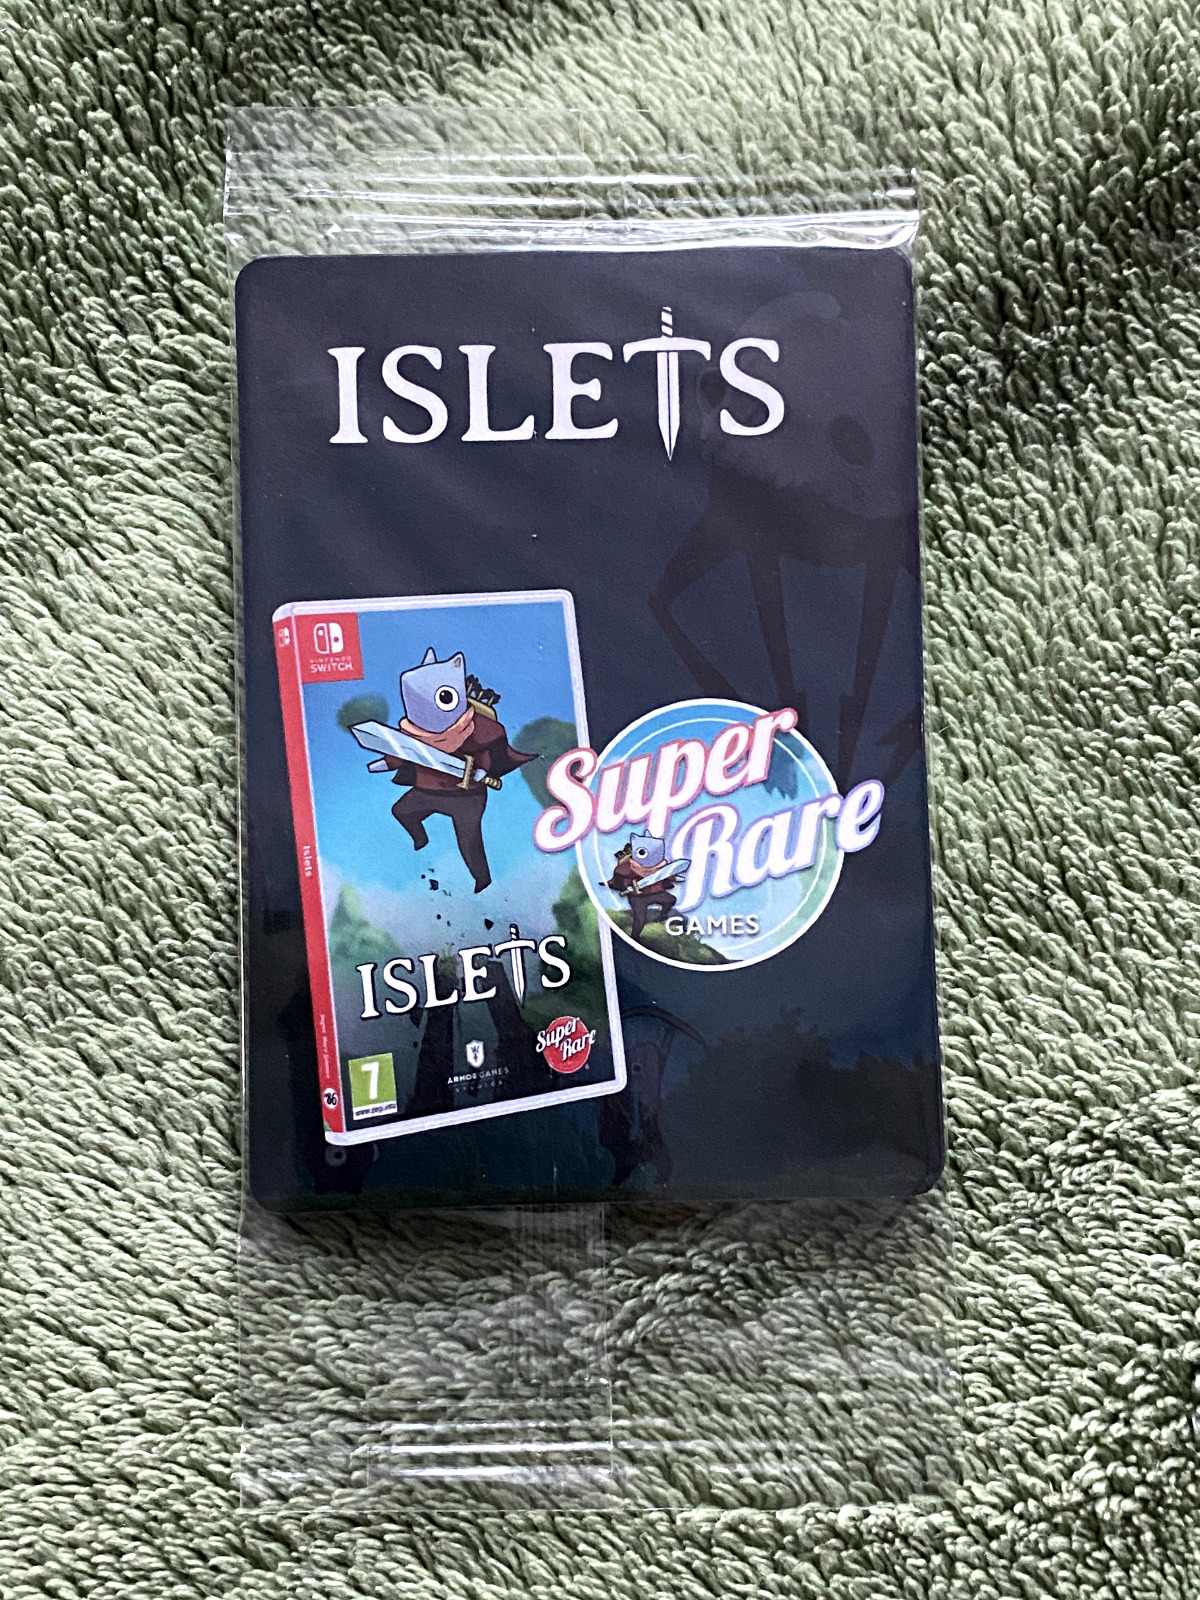 New Islets 3 Card Booster Pack Super Rare Games SRG #86 Metroidvania